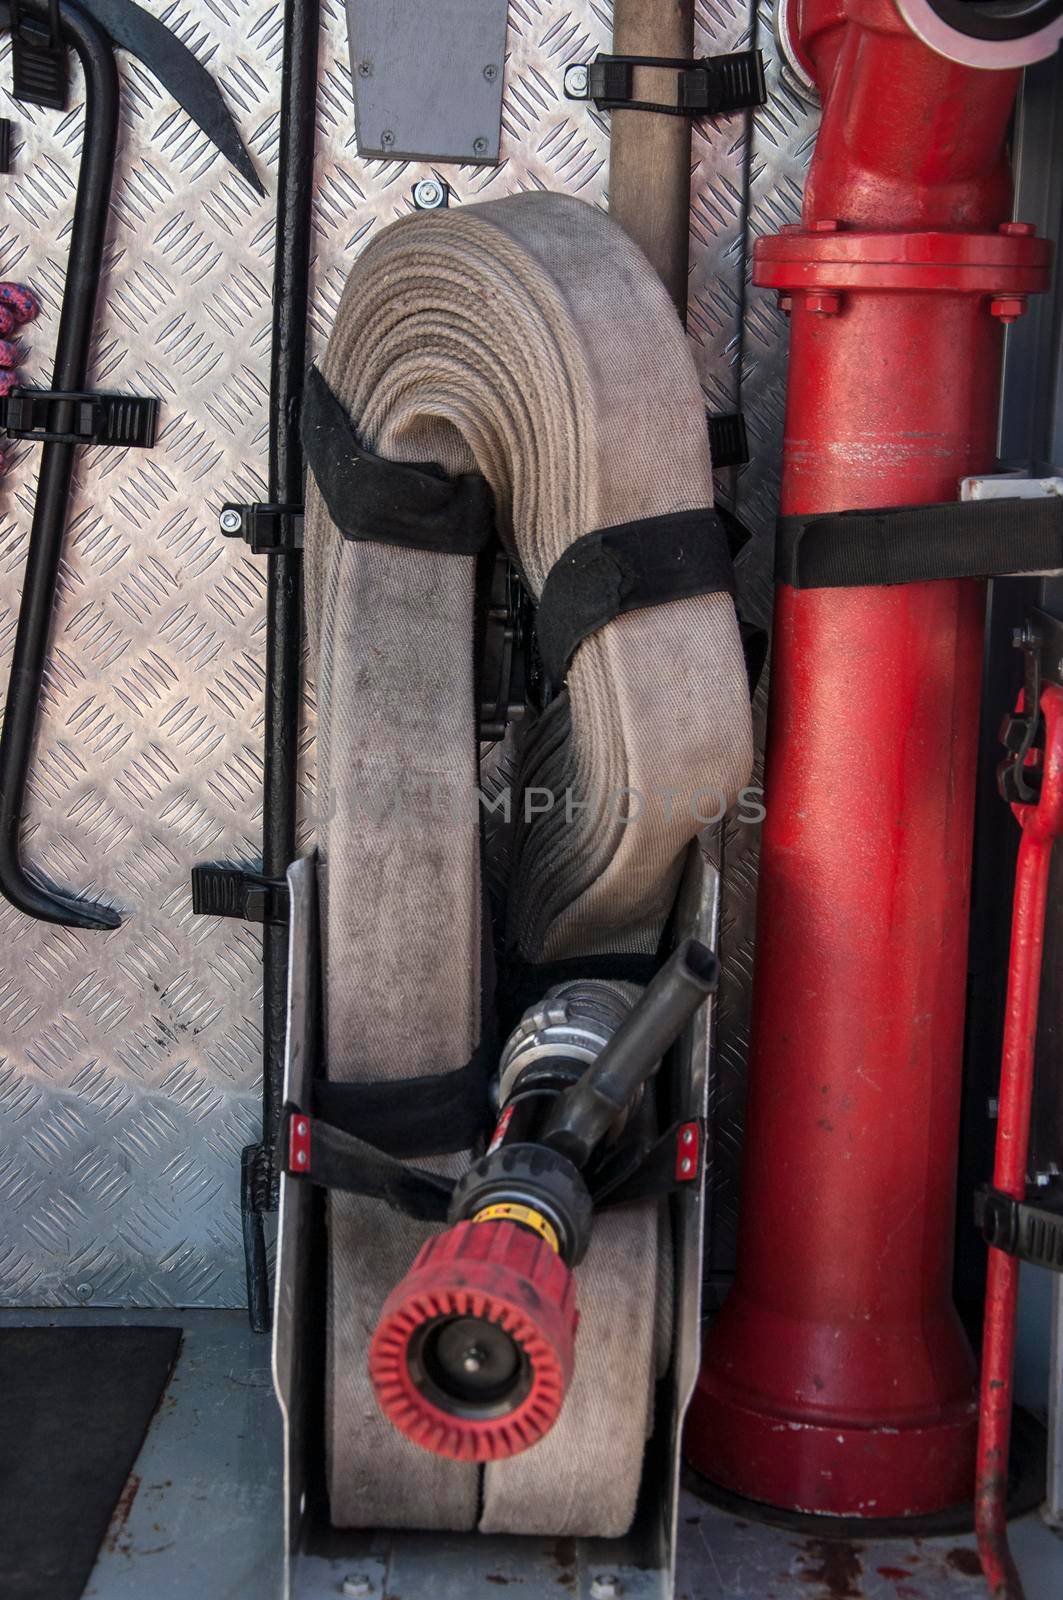 bunch of fire hoses on a firetruck. Rescue fire truck equipment. by inxti